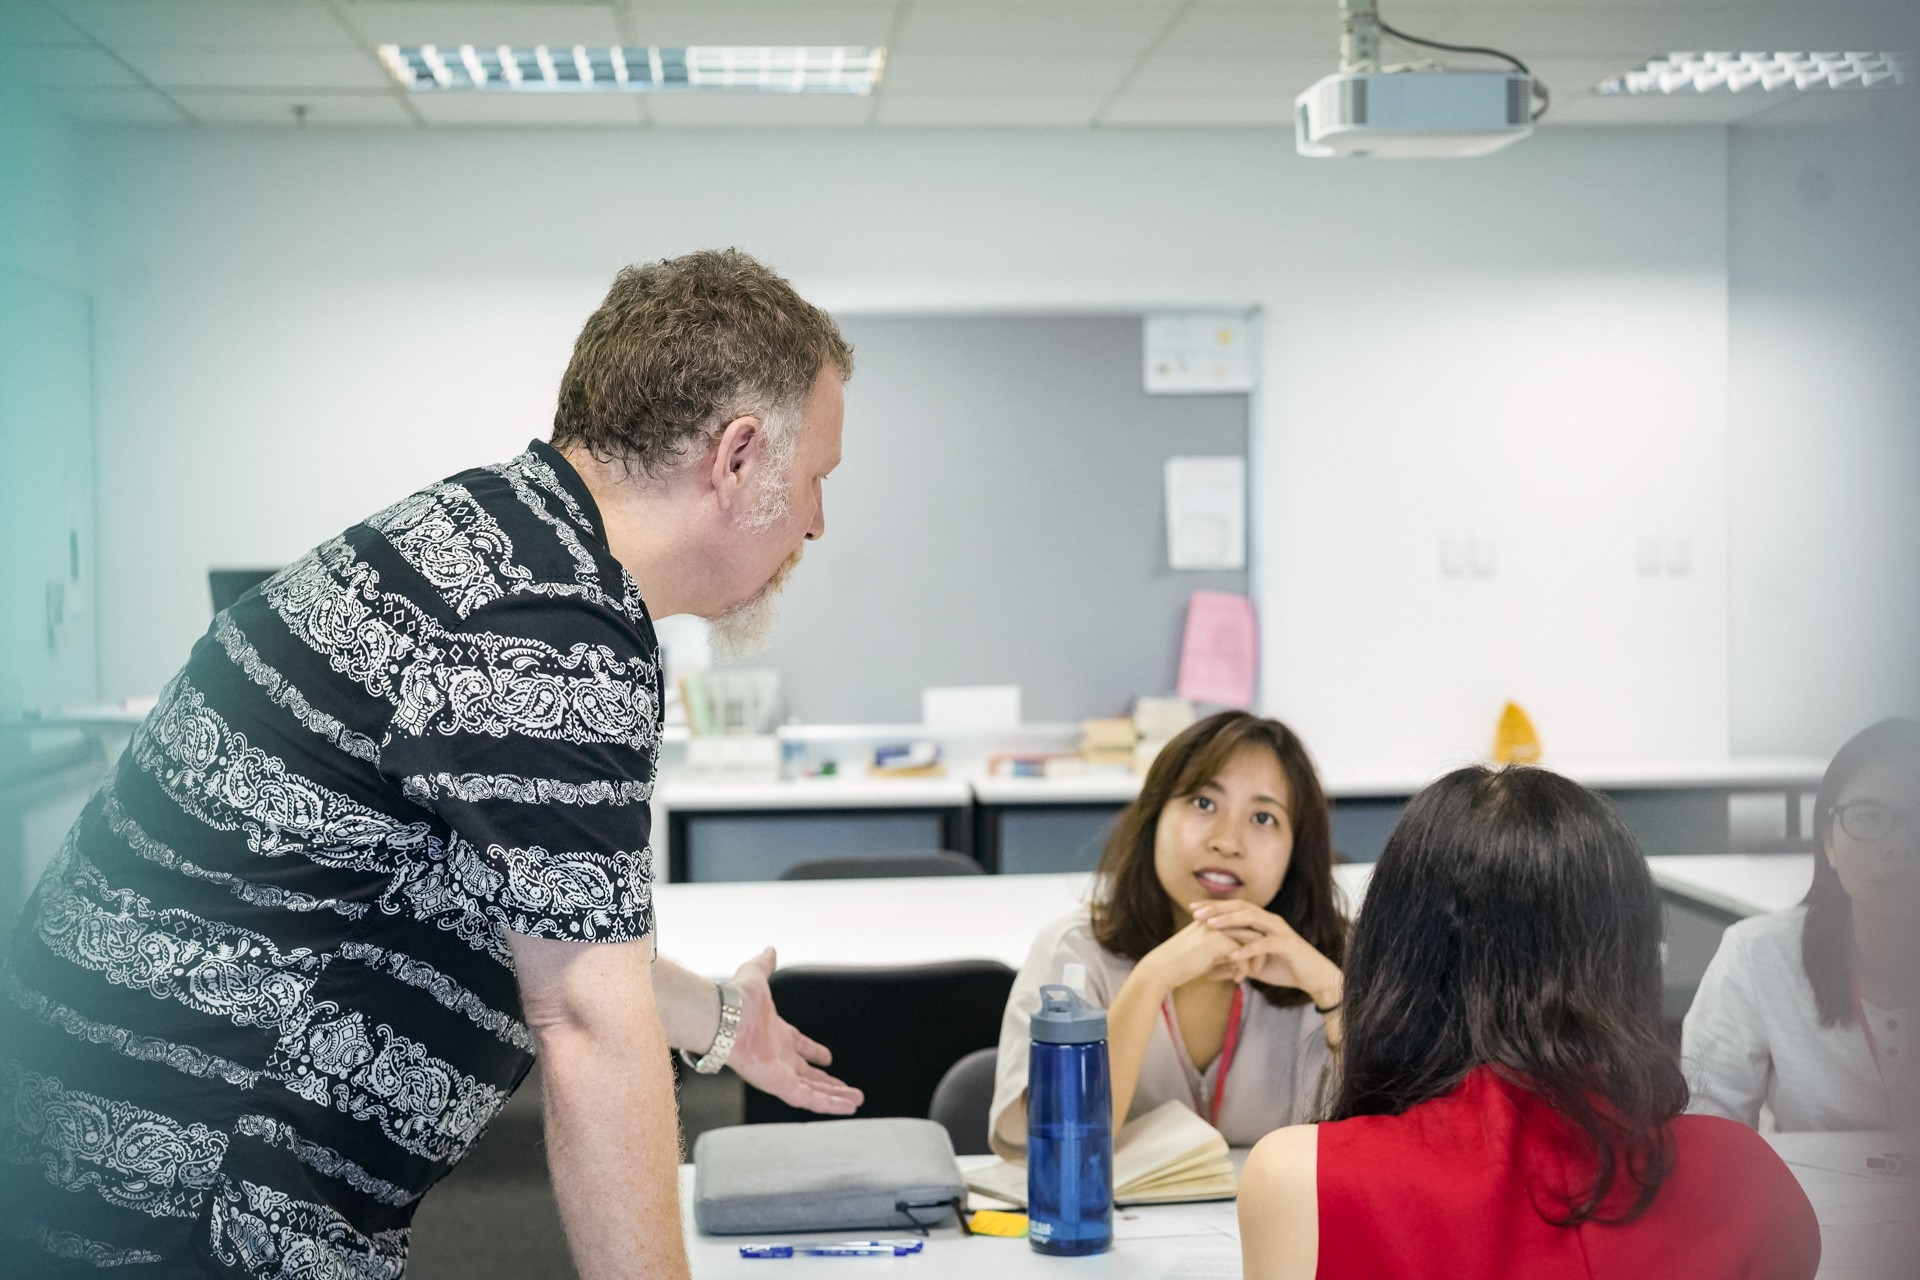 RMIT Vietnam educator Adam Walford shared many interesting teaching methods in "Practical Ideas for Motivating Language Learners" session at Hanoi Teacher Talks.  